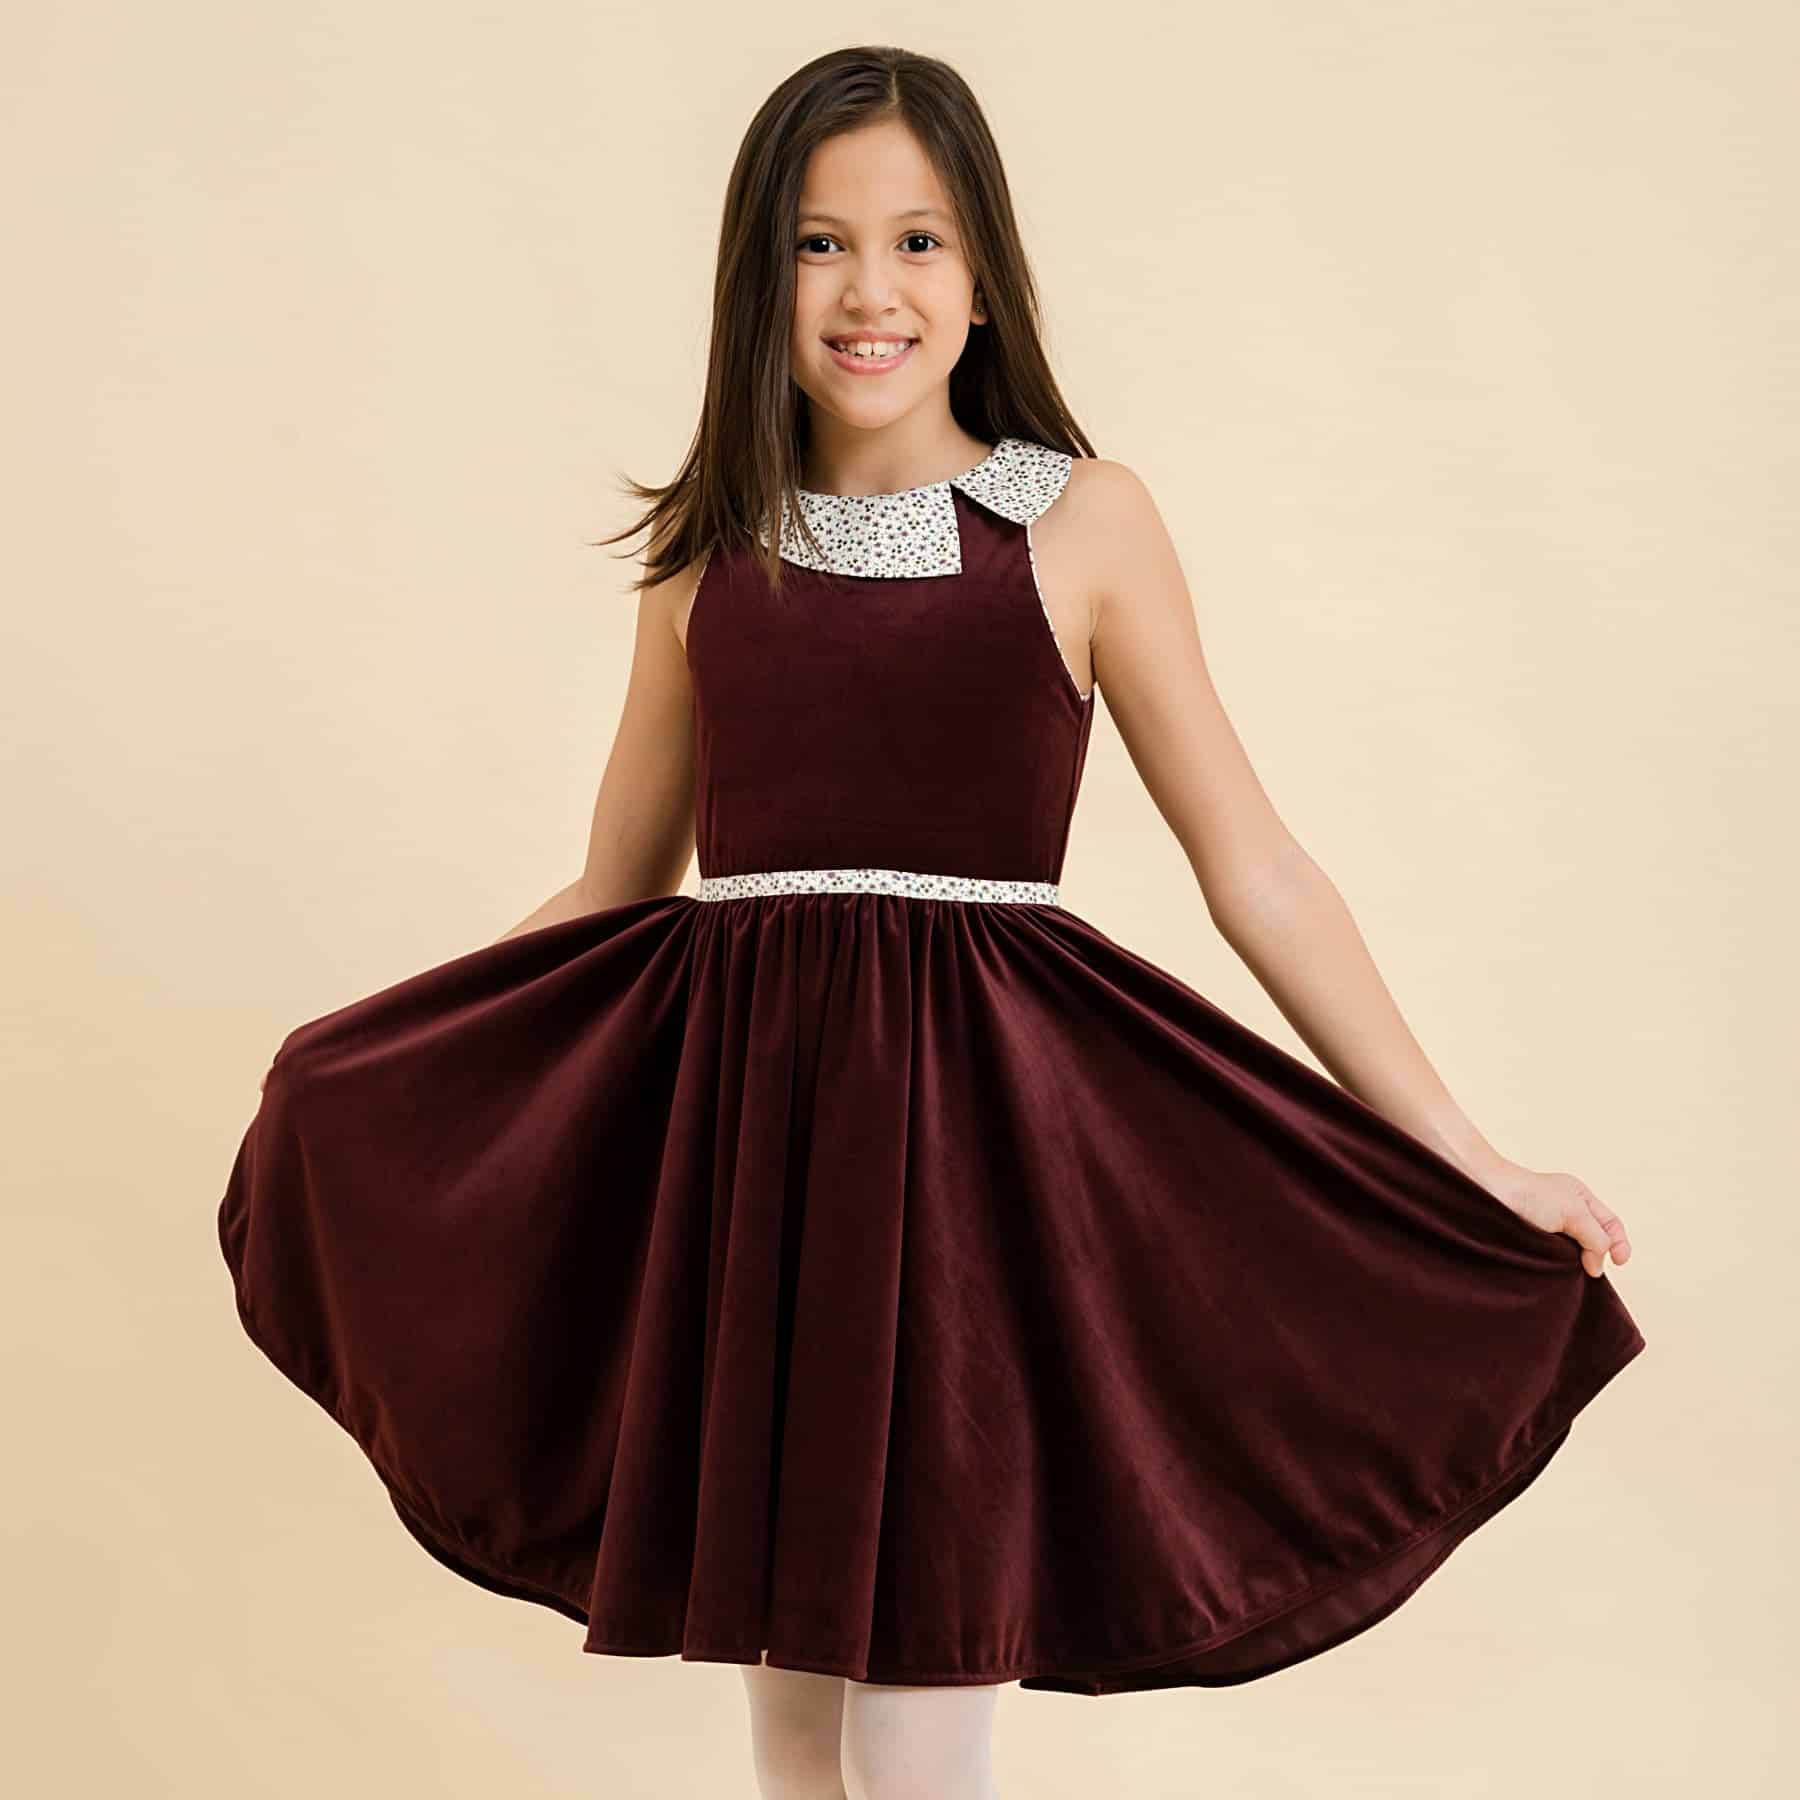 Cute spinning dress for girls in pale pink velvet from the children's fashion brand LA FAUTE A VOLTAIRE